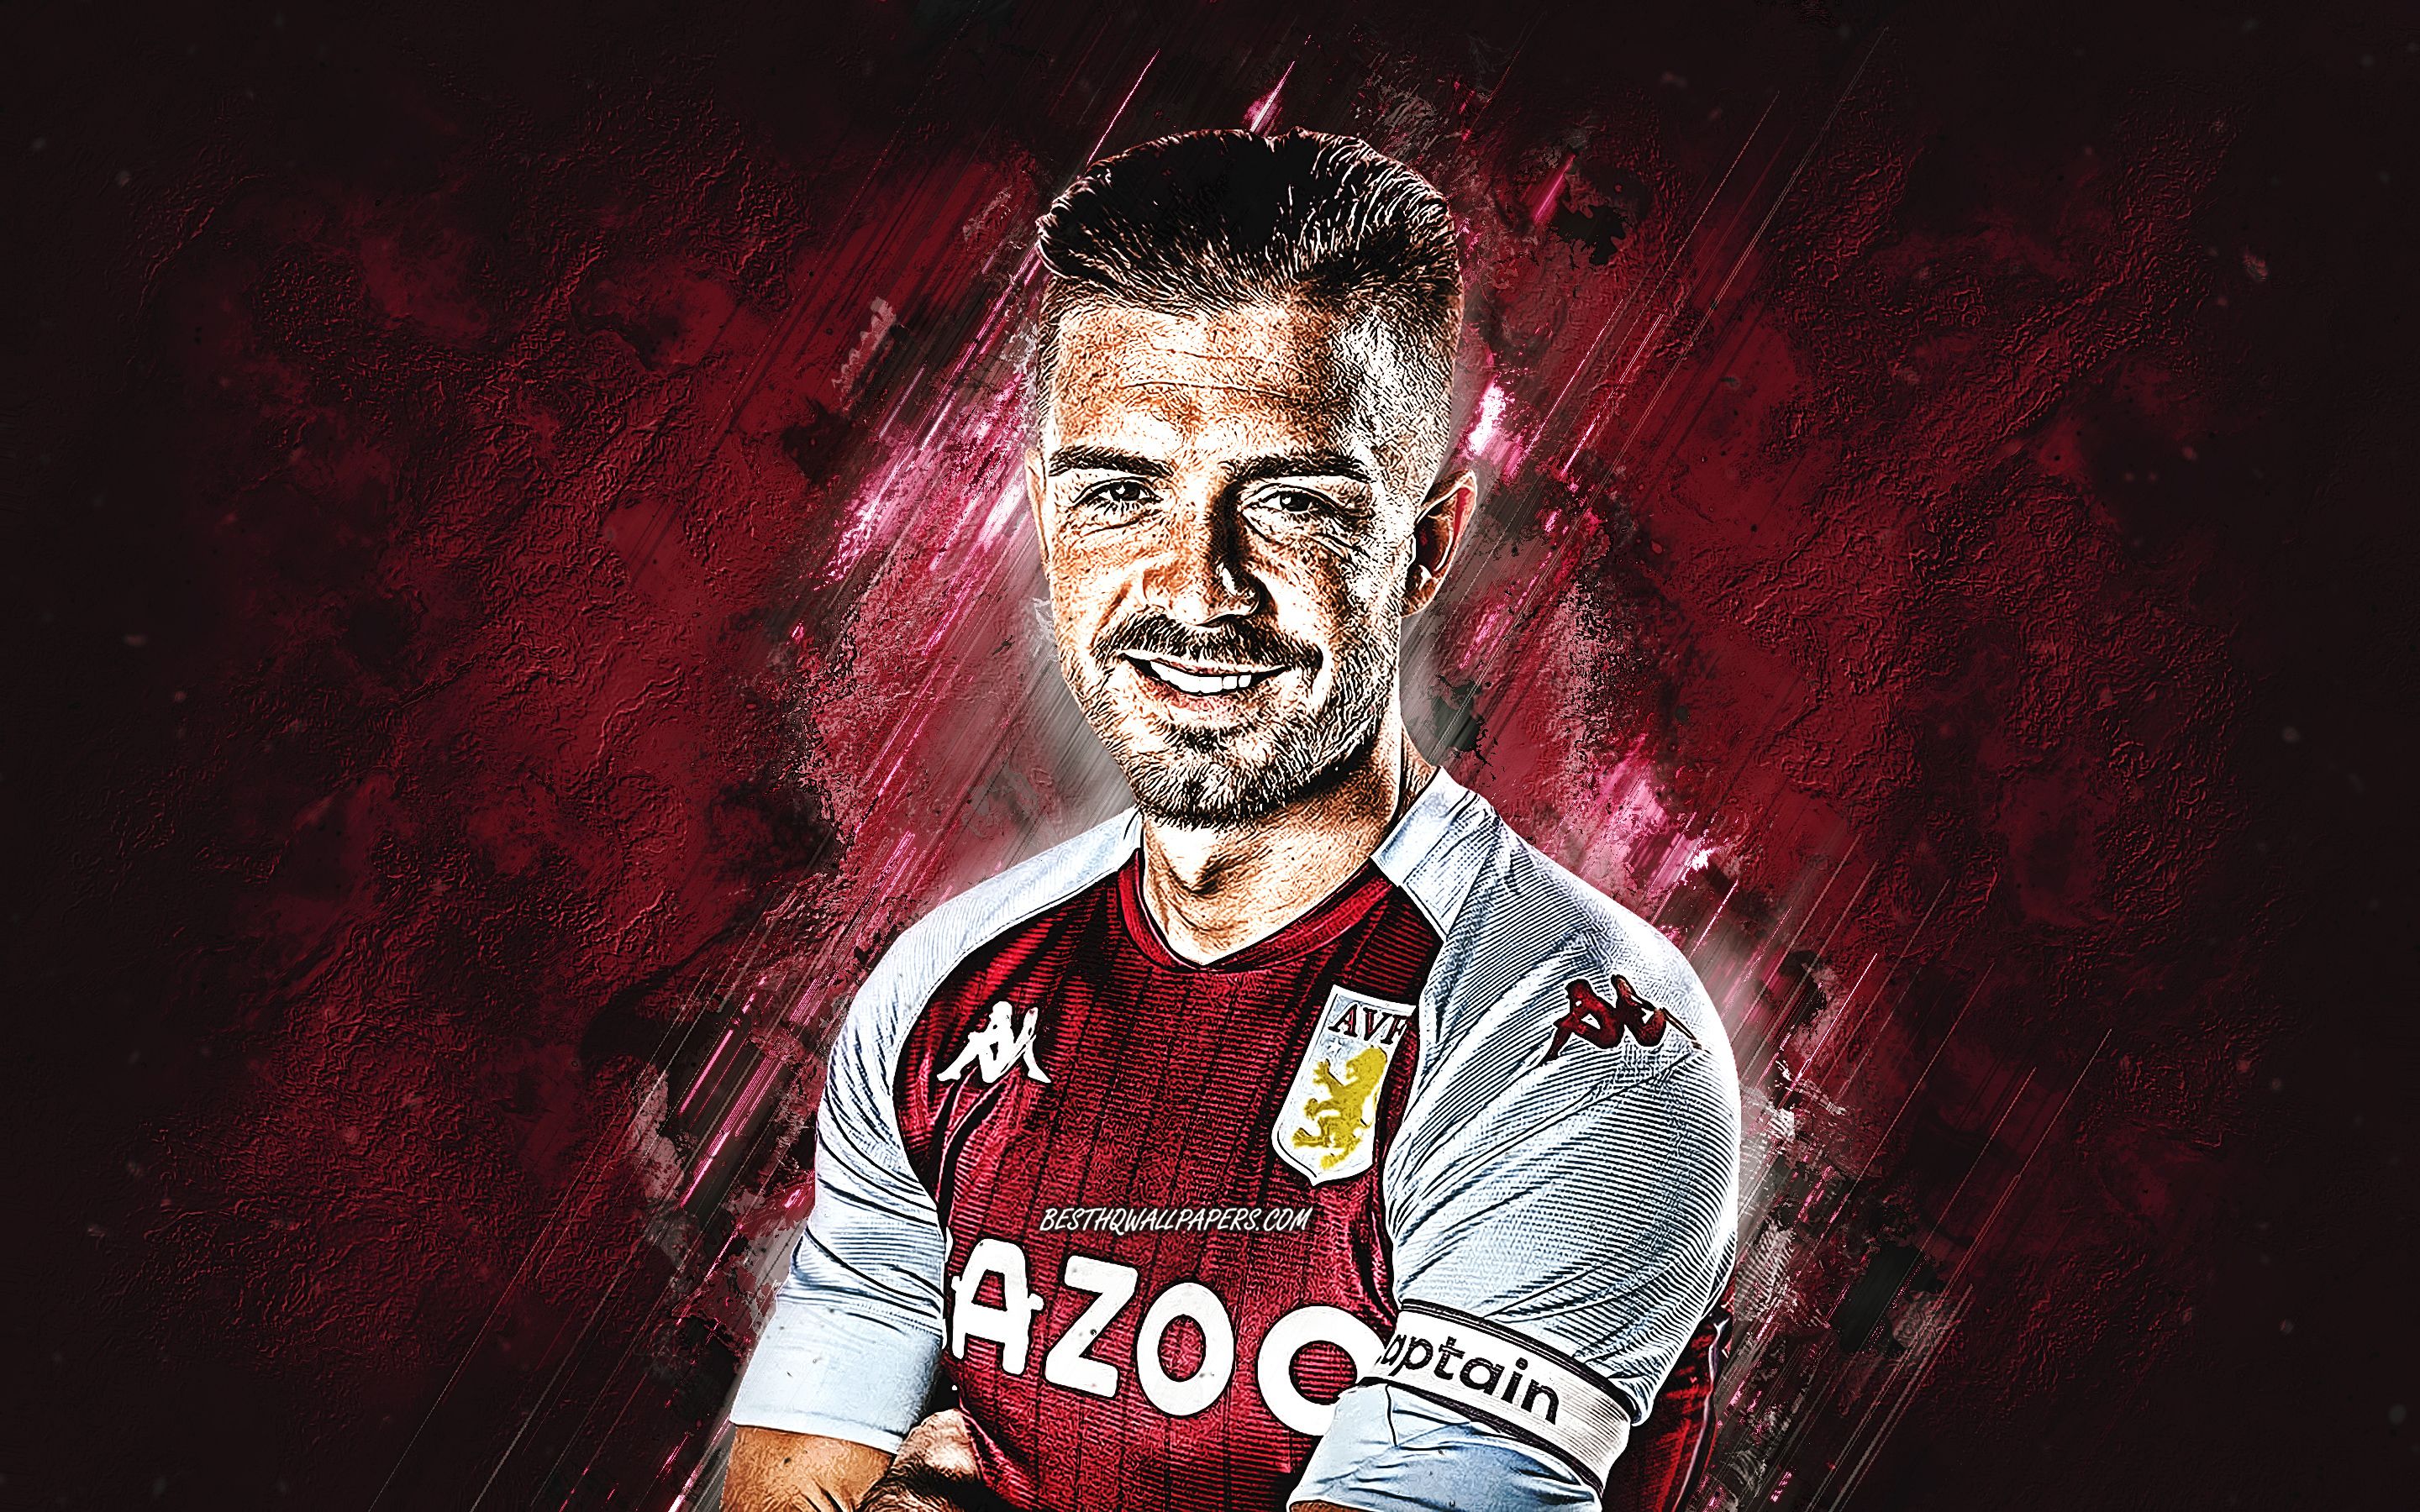 Download wallpaper Jack Grealish, Aston Villa FC, english footballer, midfielder, red stone background, Premier League, soccer for desktop with resolution 2880x1800. High Quality HD picture wallpaper